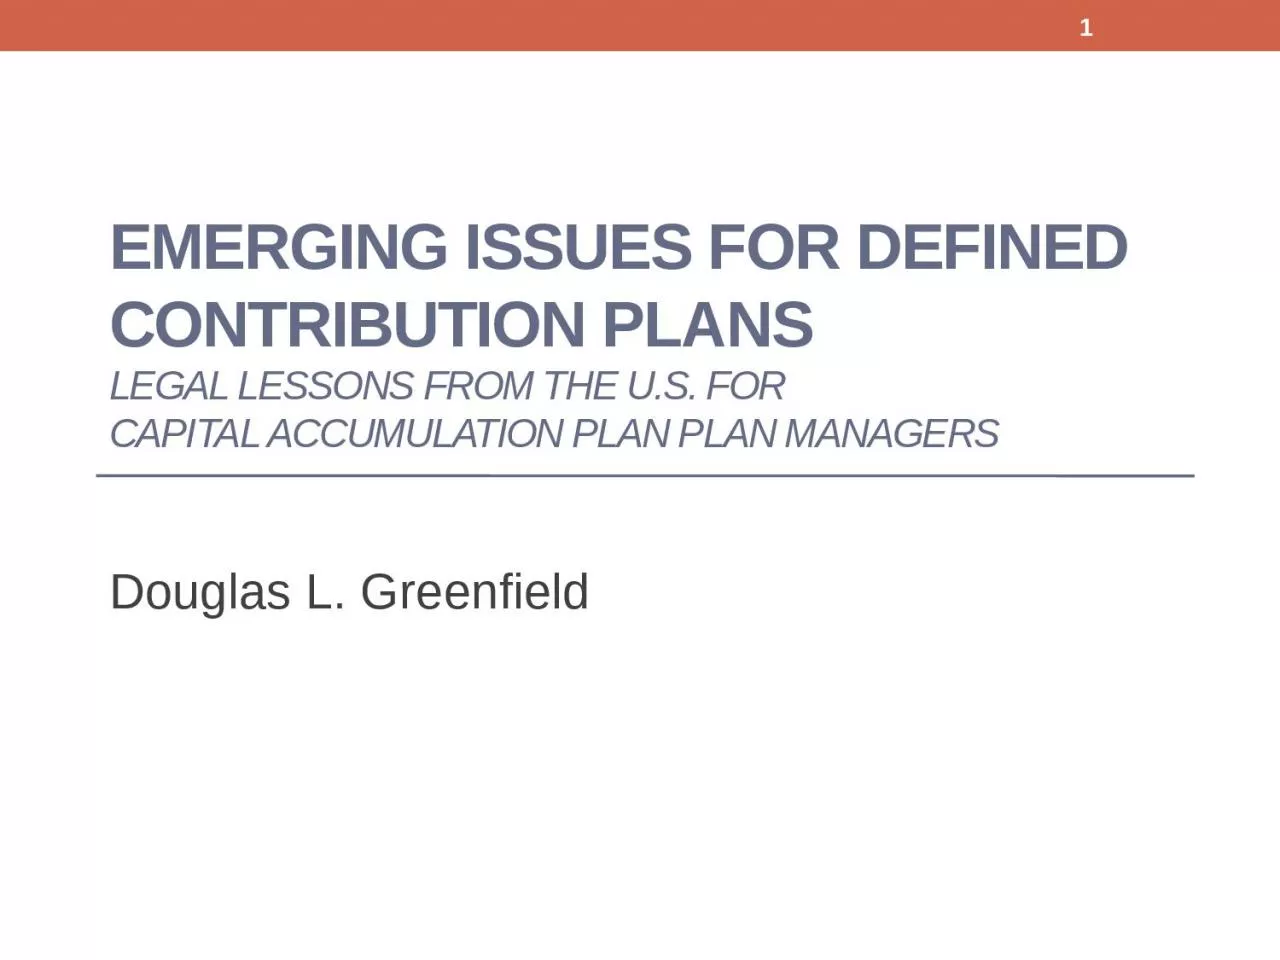 Emerging Issues for Defined Contribution